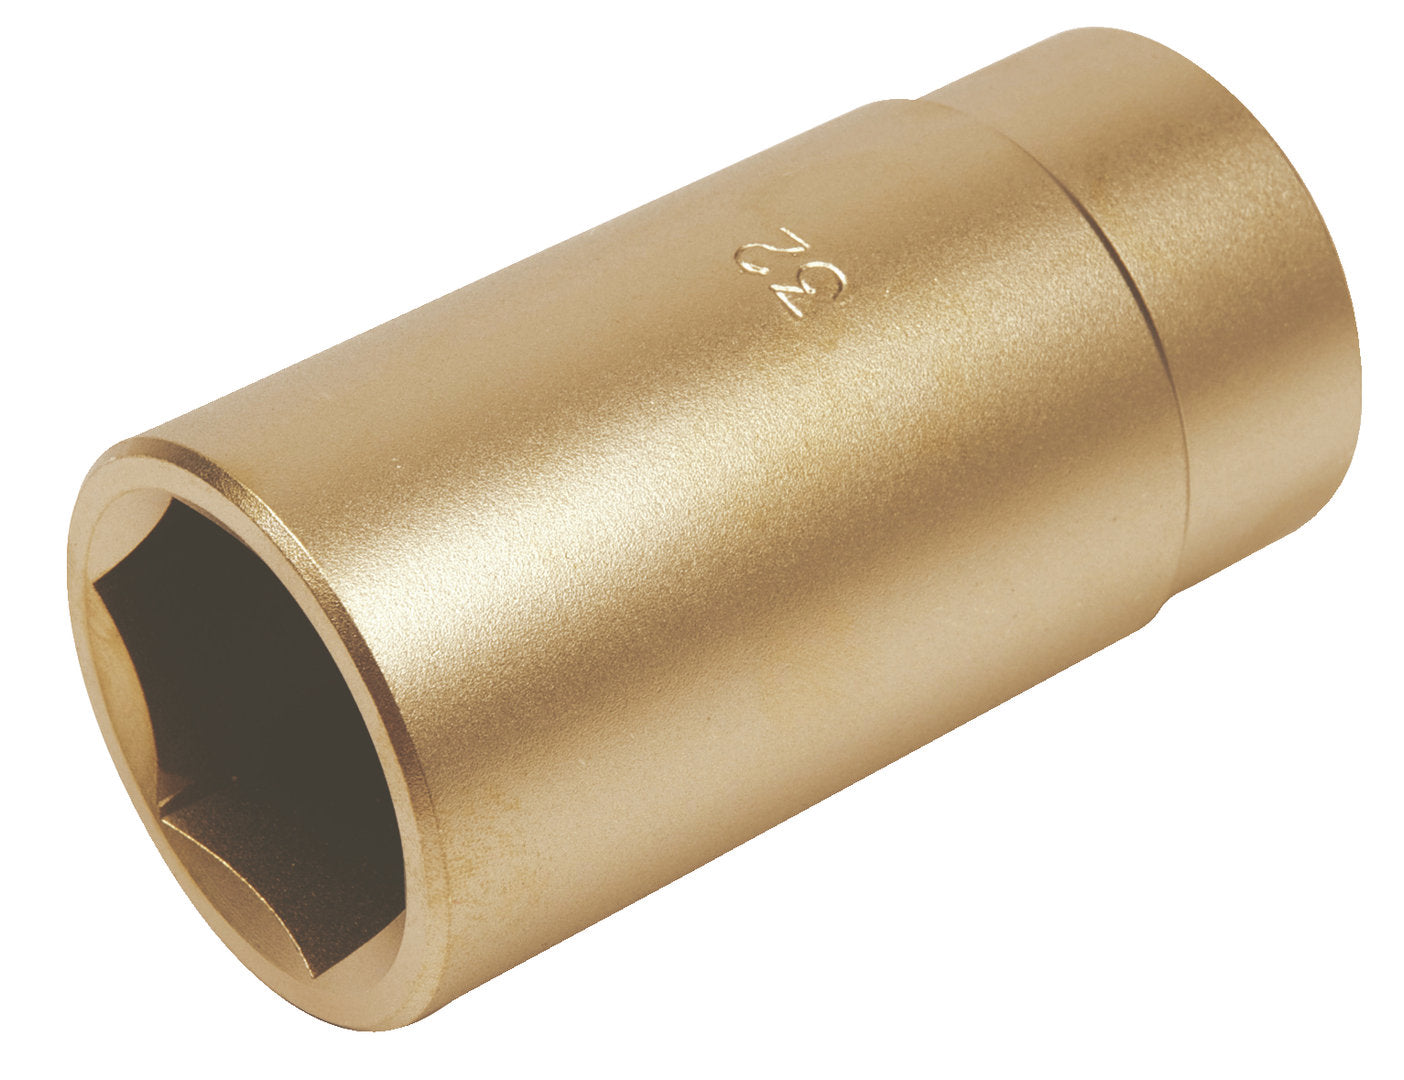 GEDORE GED0350009S - 1/2" hex socket, length 19mm (2523906)